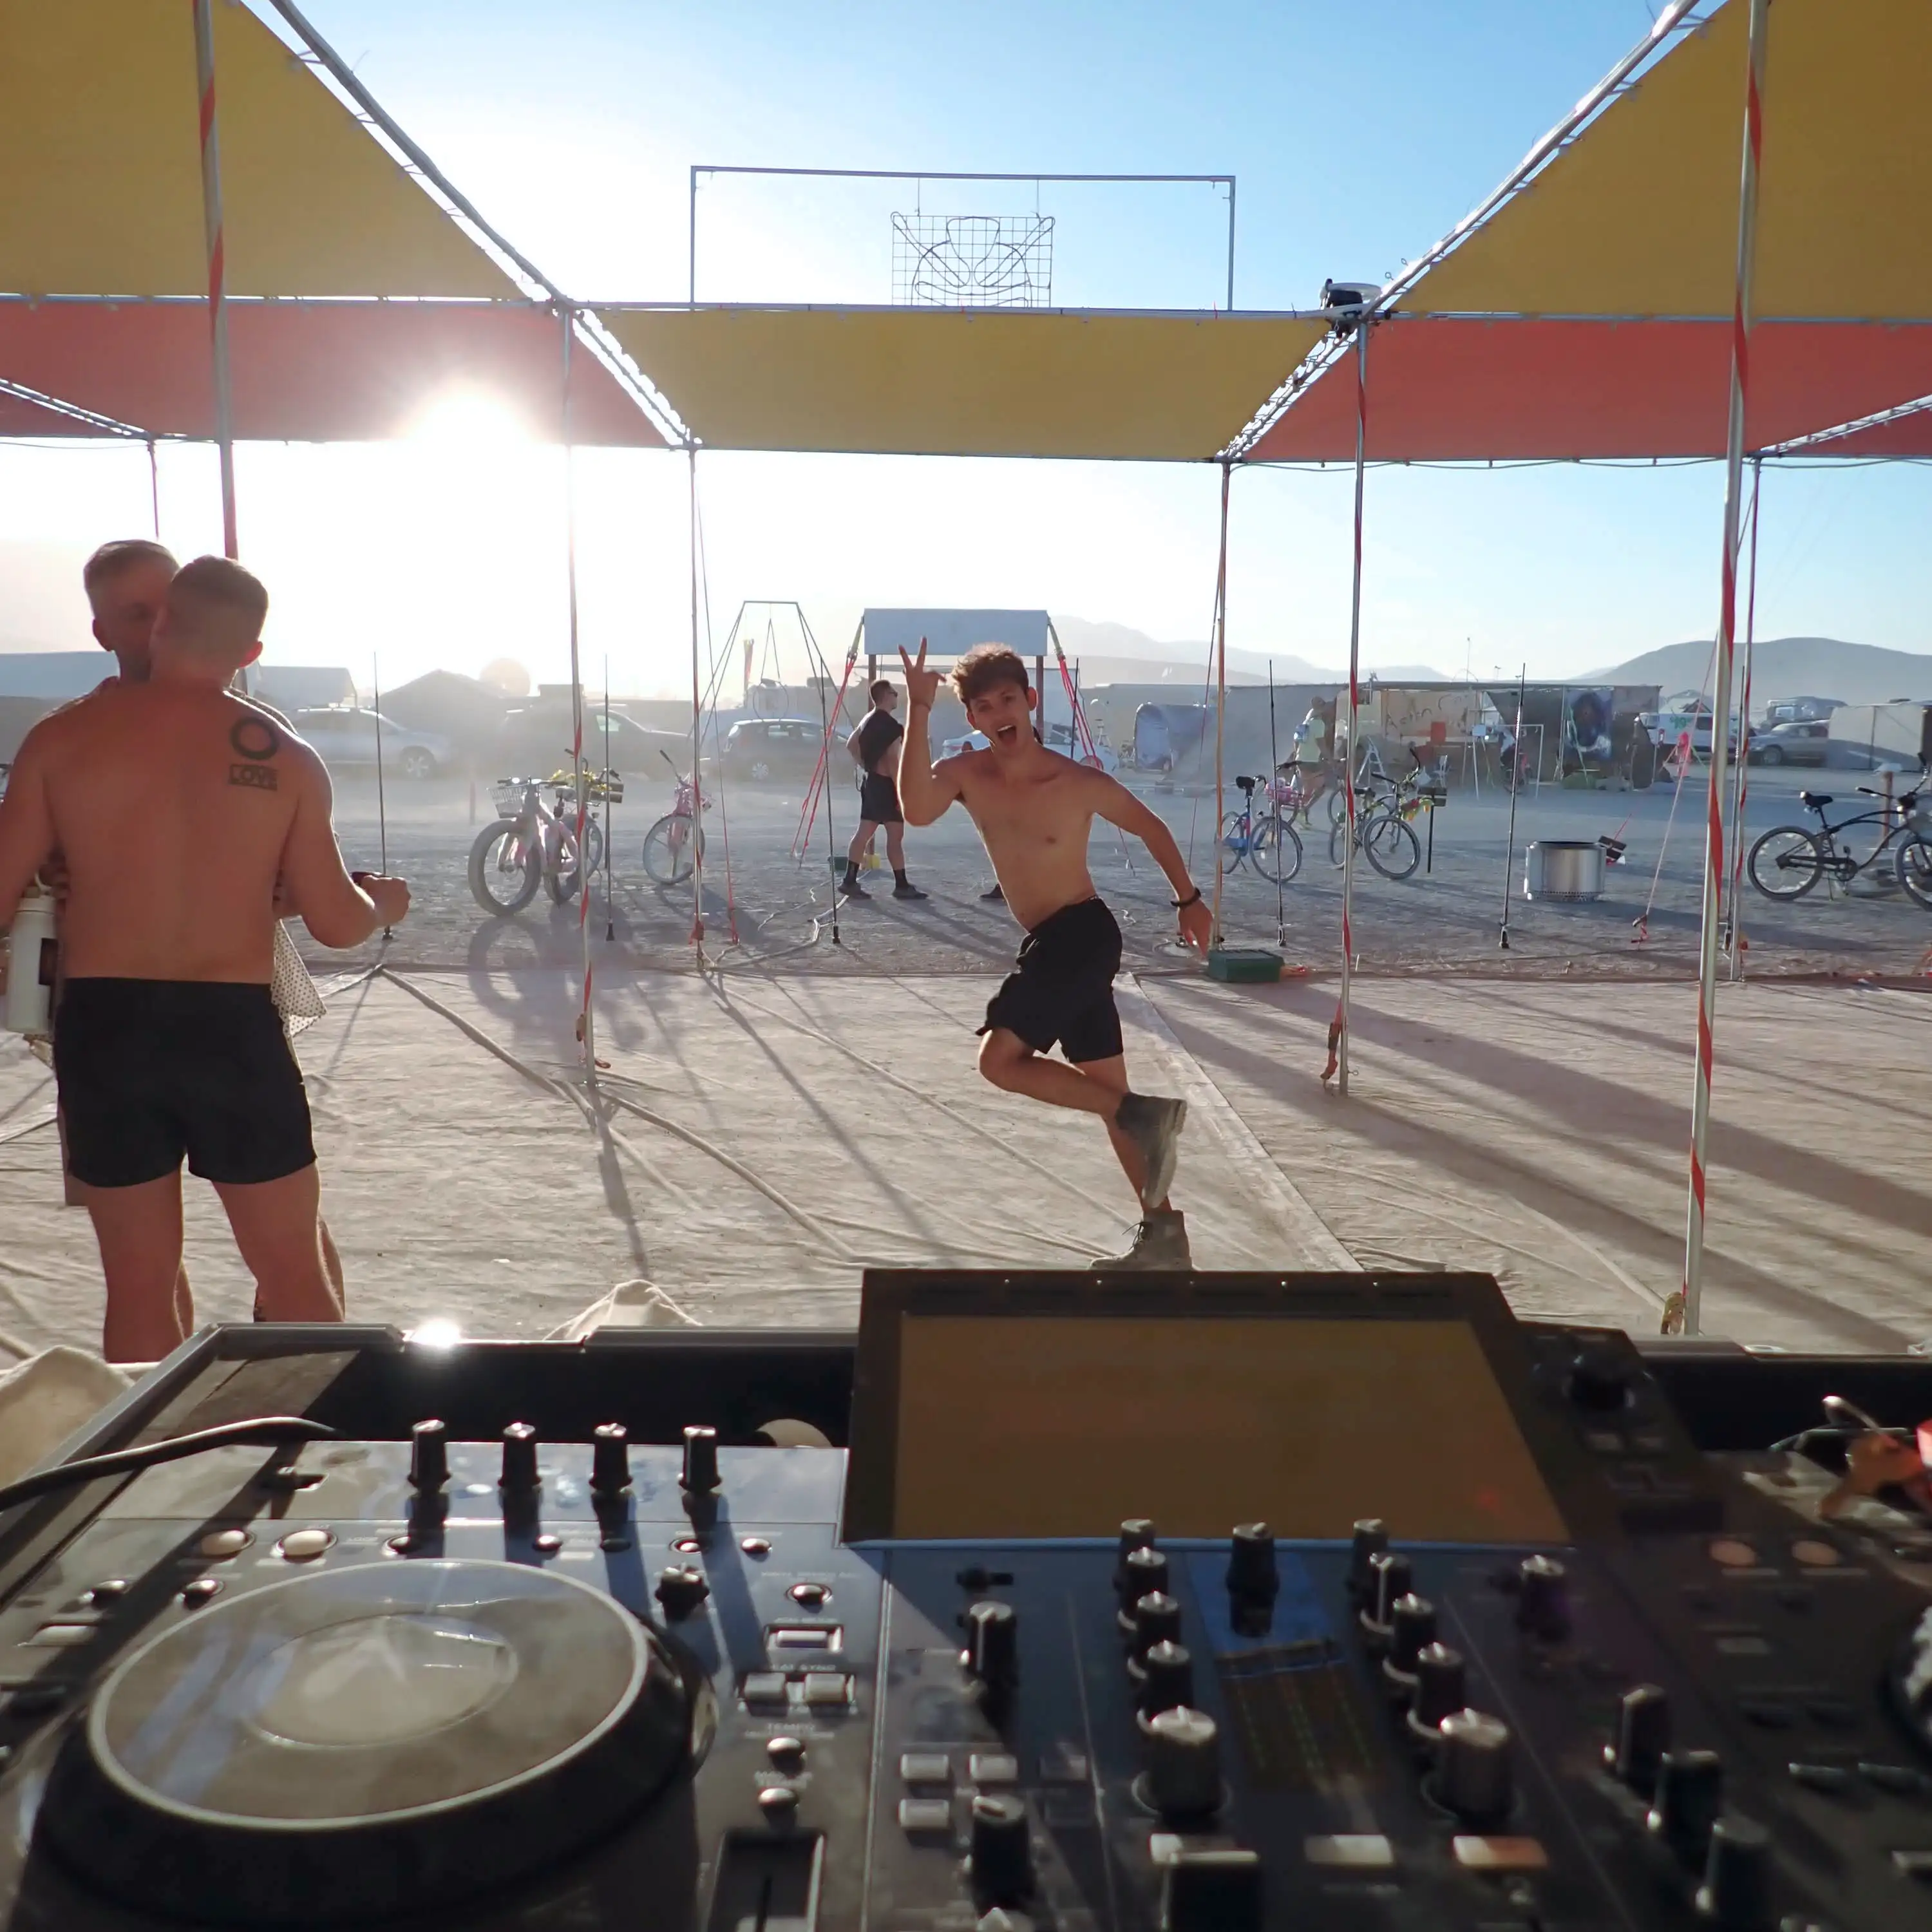 A sunset scene from the Future Turtles shade structure. Looking over the DJ equipment at a shirtless young man doing an exhuberant dance by himself. On the left side, two beefy shirtless men are making out. In the background, you can see our neighbors camp across the street where there is an aerial hoop structure set up for acrobatics.